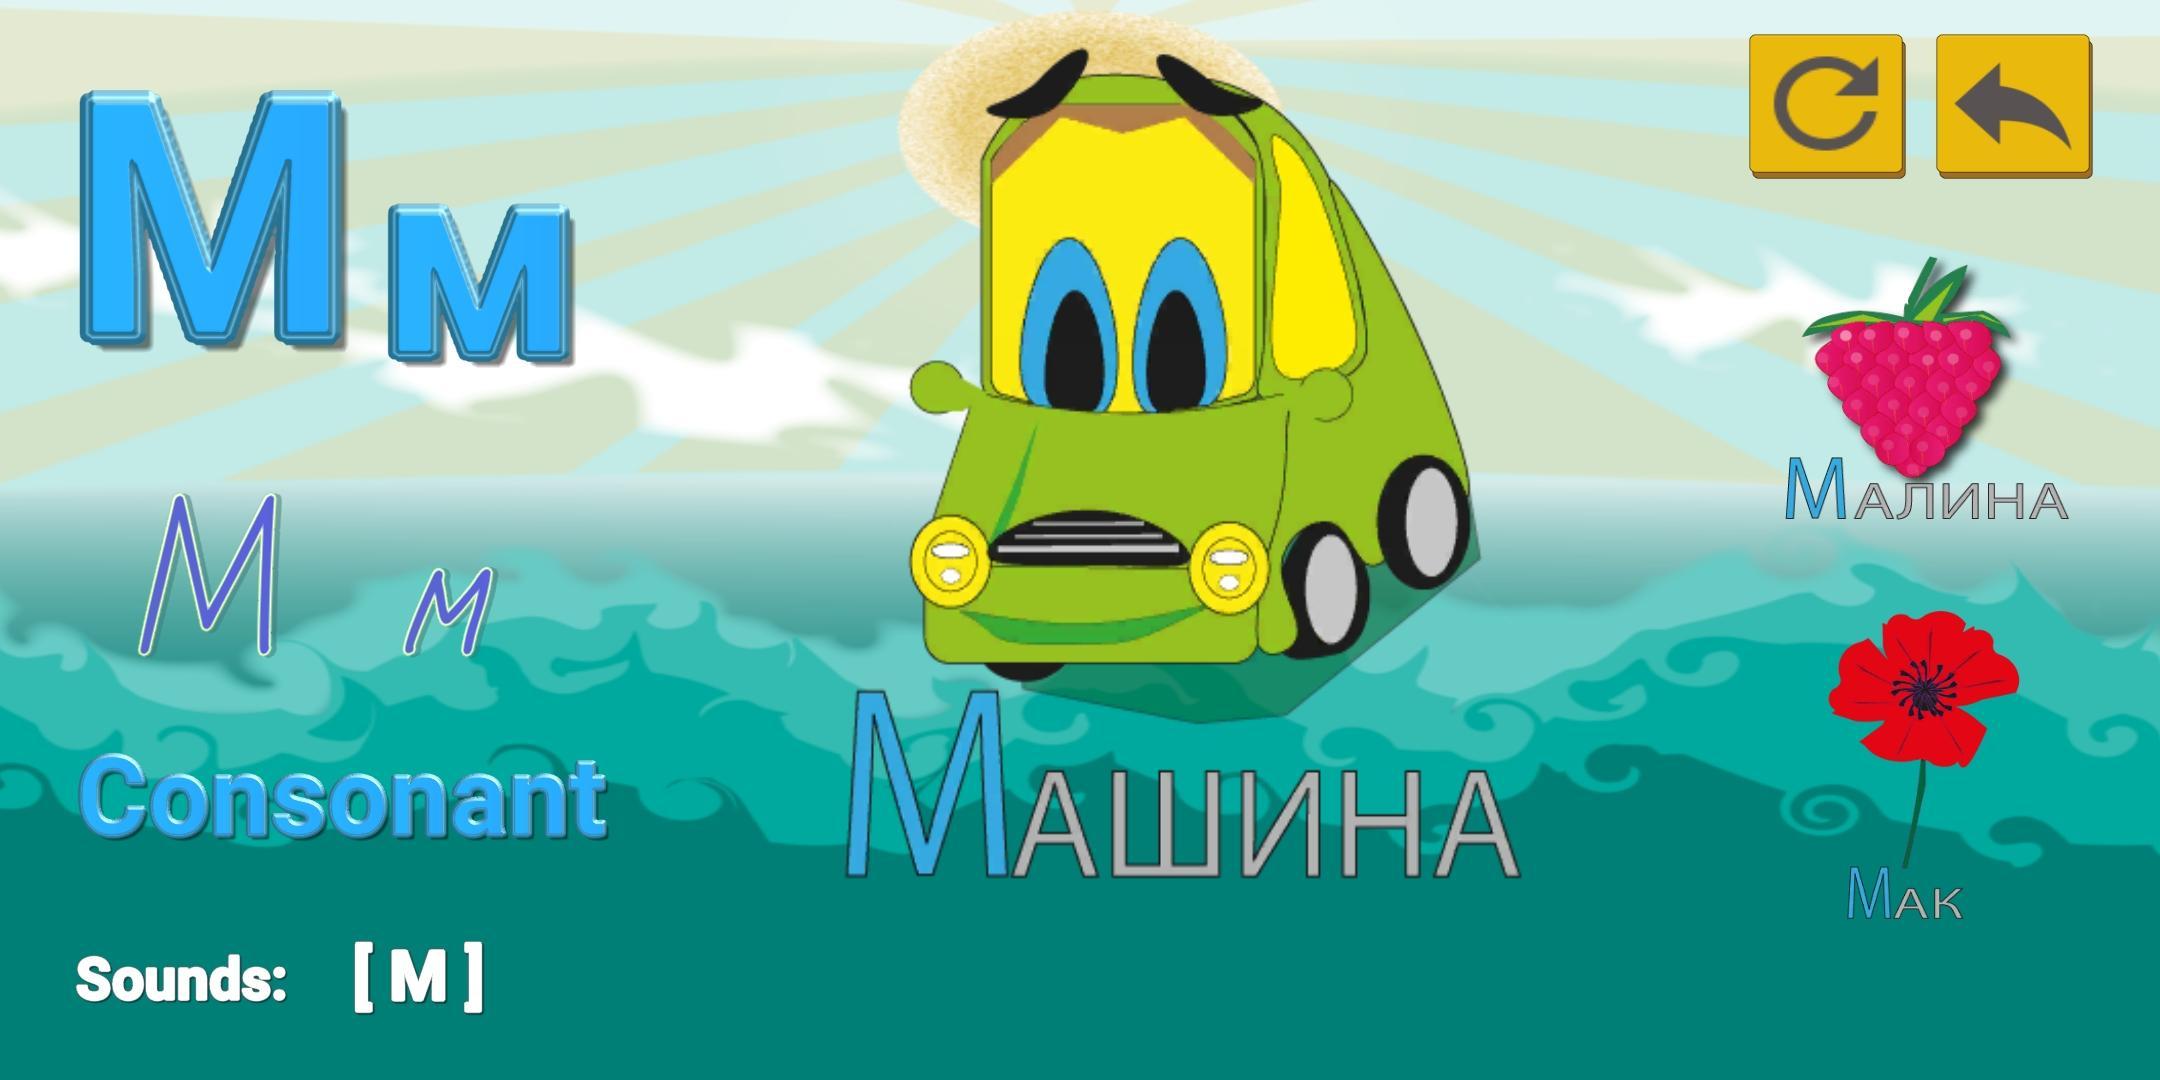 Russian alphabet learning with letter games 1.9 Screenshot 11